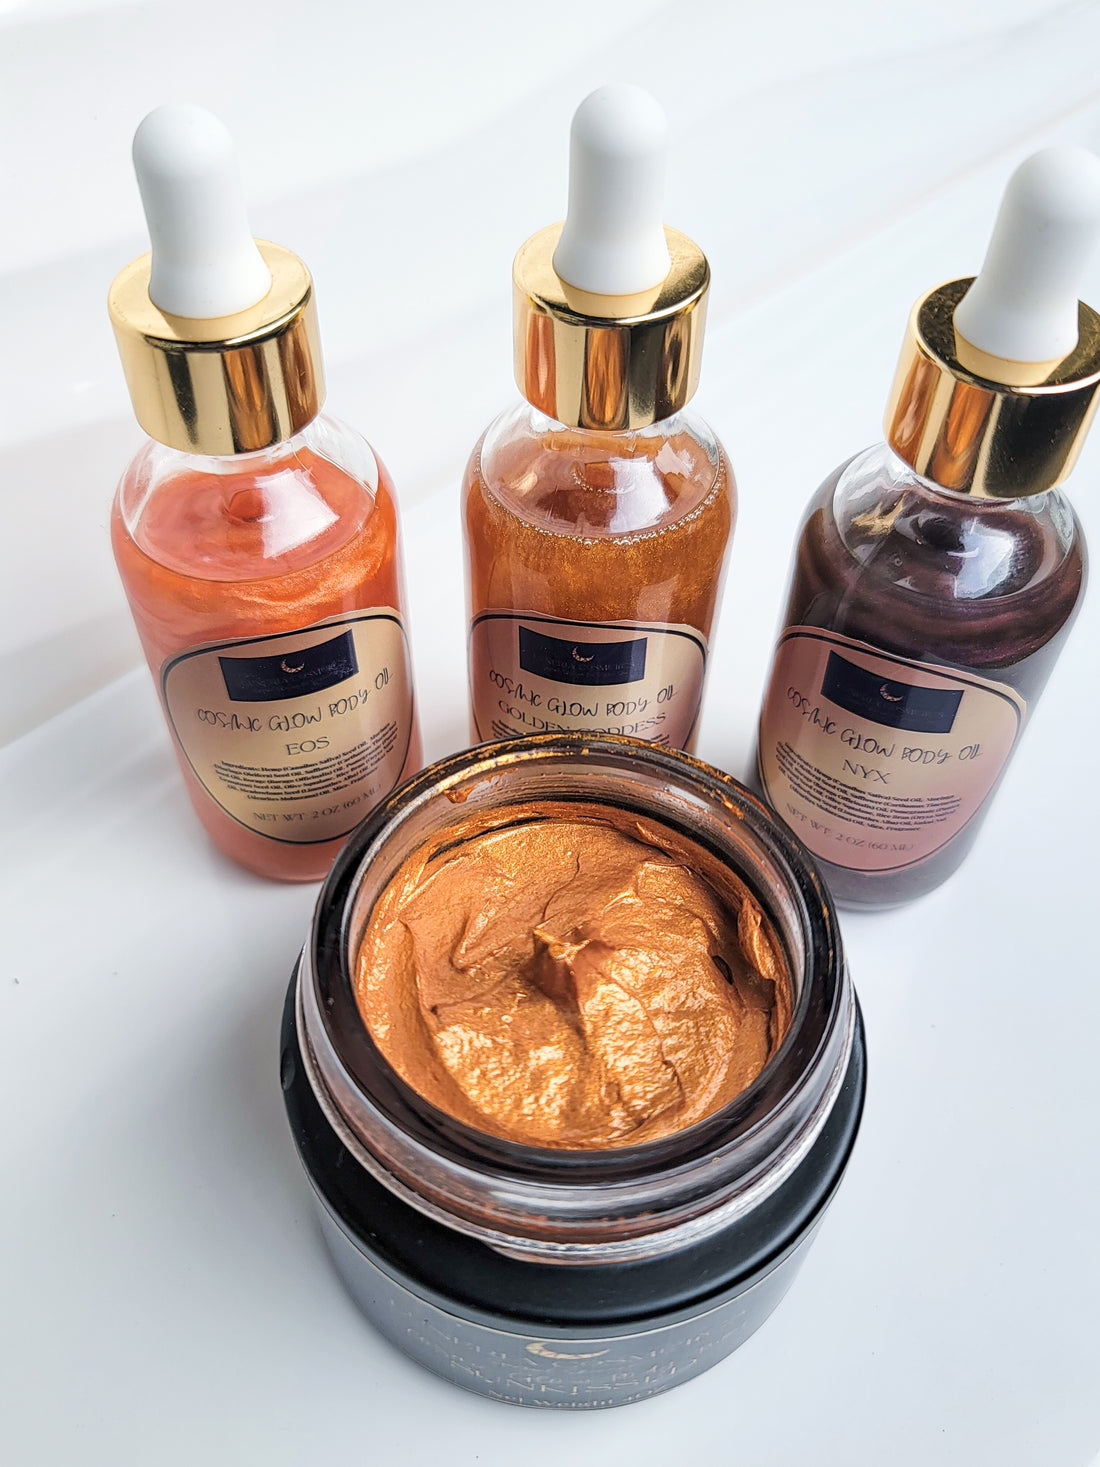 Sparkle, Shimmer, and Glow: The Best Ways to Use Luneria's Cosmic Glow Body Oils & Sunkissed Body Butter